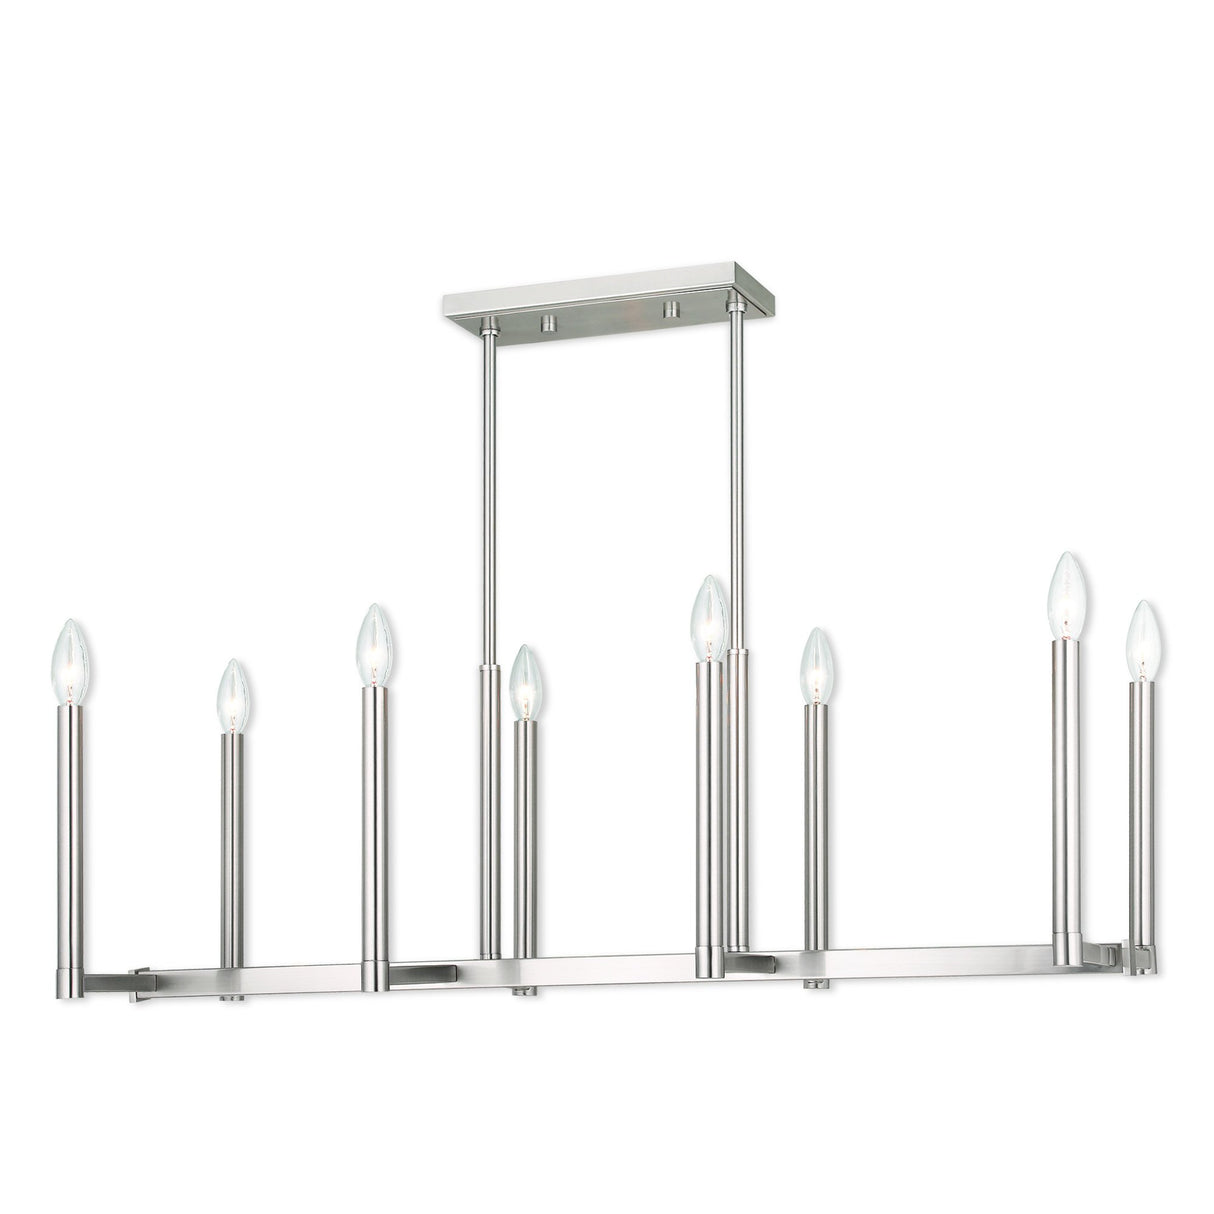 Livex Lighting 40258-91 Contemporary Modern Eight Light Linear Chandelier from Alpine Collection in Pwt, Nckl, B/S, Slvr. Finish, 36.50 inches, 18.50x36.50x14.00, Brushed Nickel